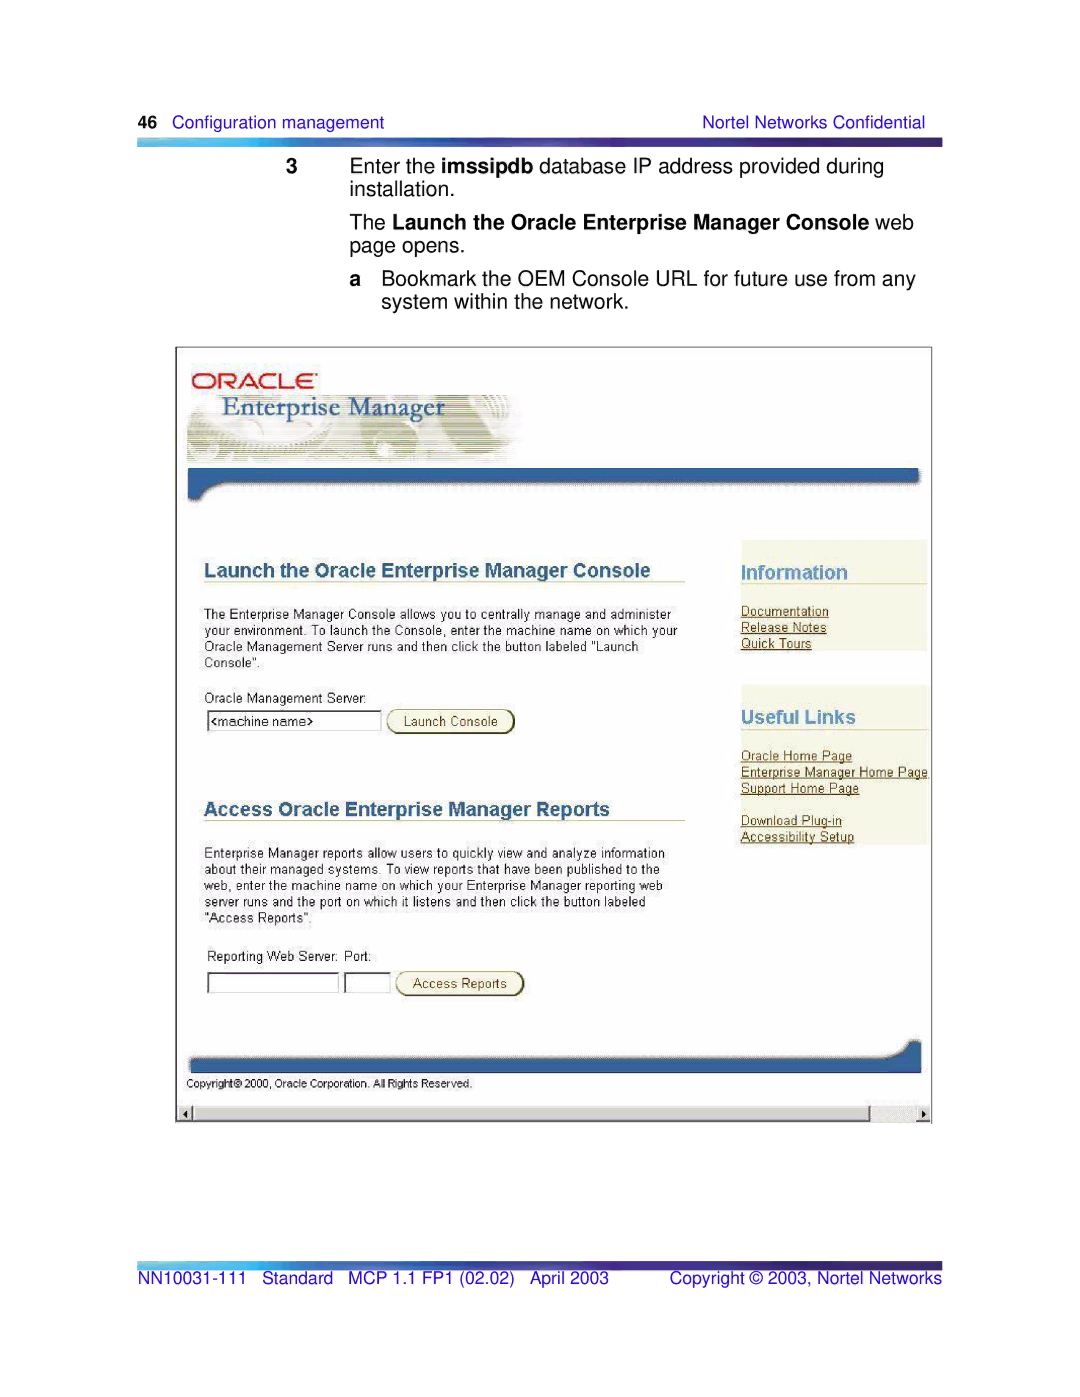 Nortel Networks Standard MCP 1.1 FP1 (02.02) manual Launch the Oracle Enterprise Manager Console web page opens 